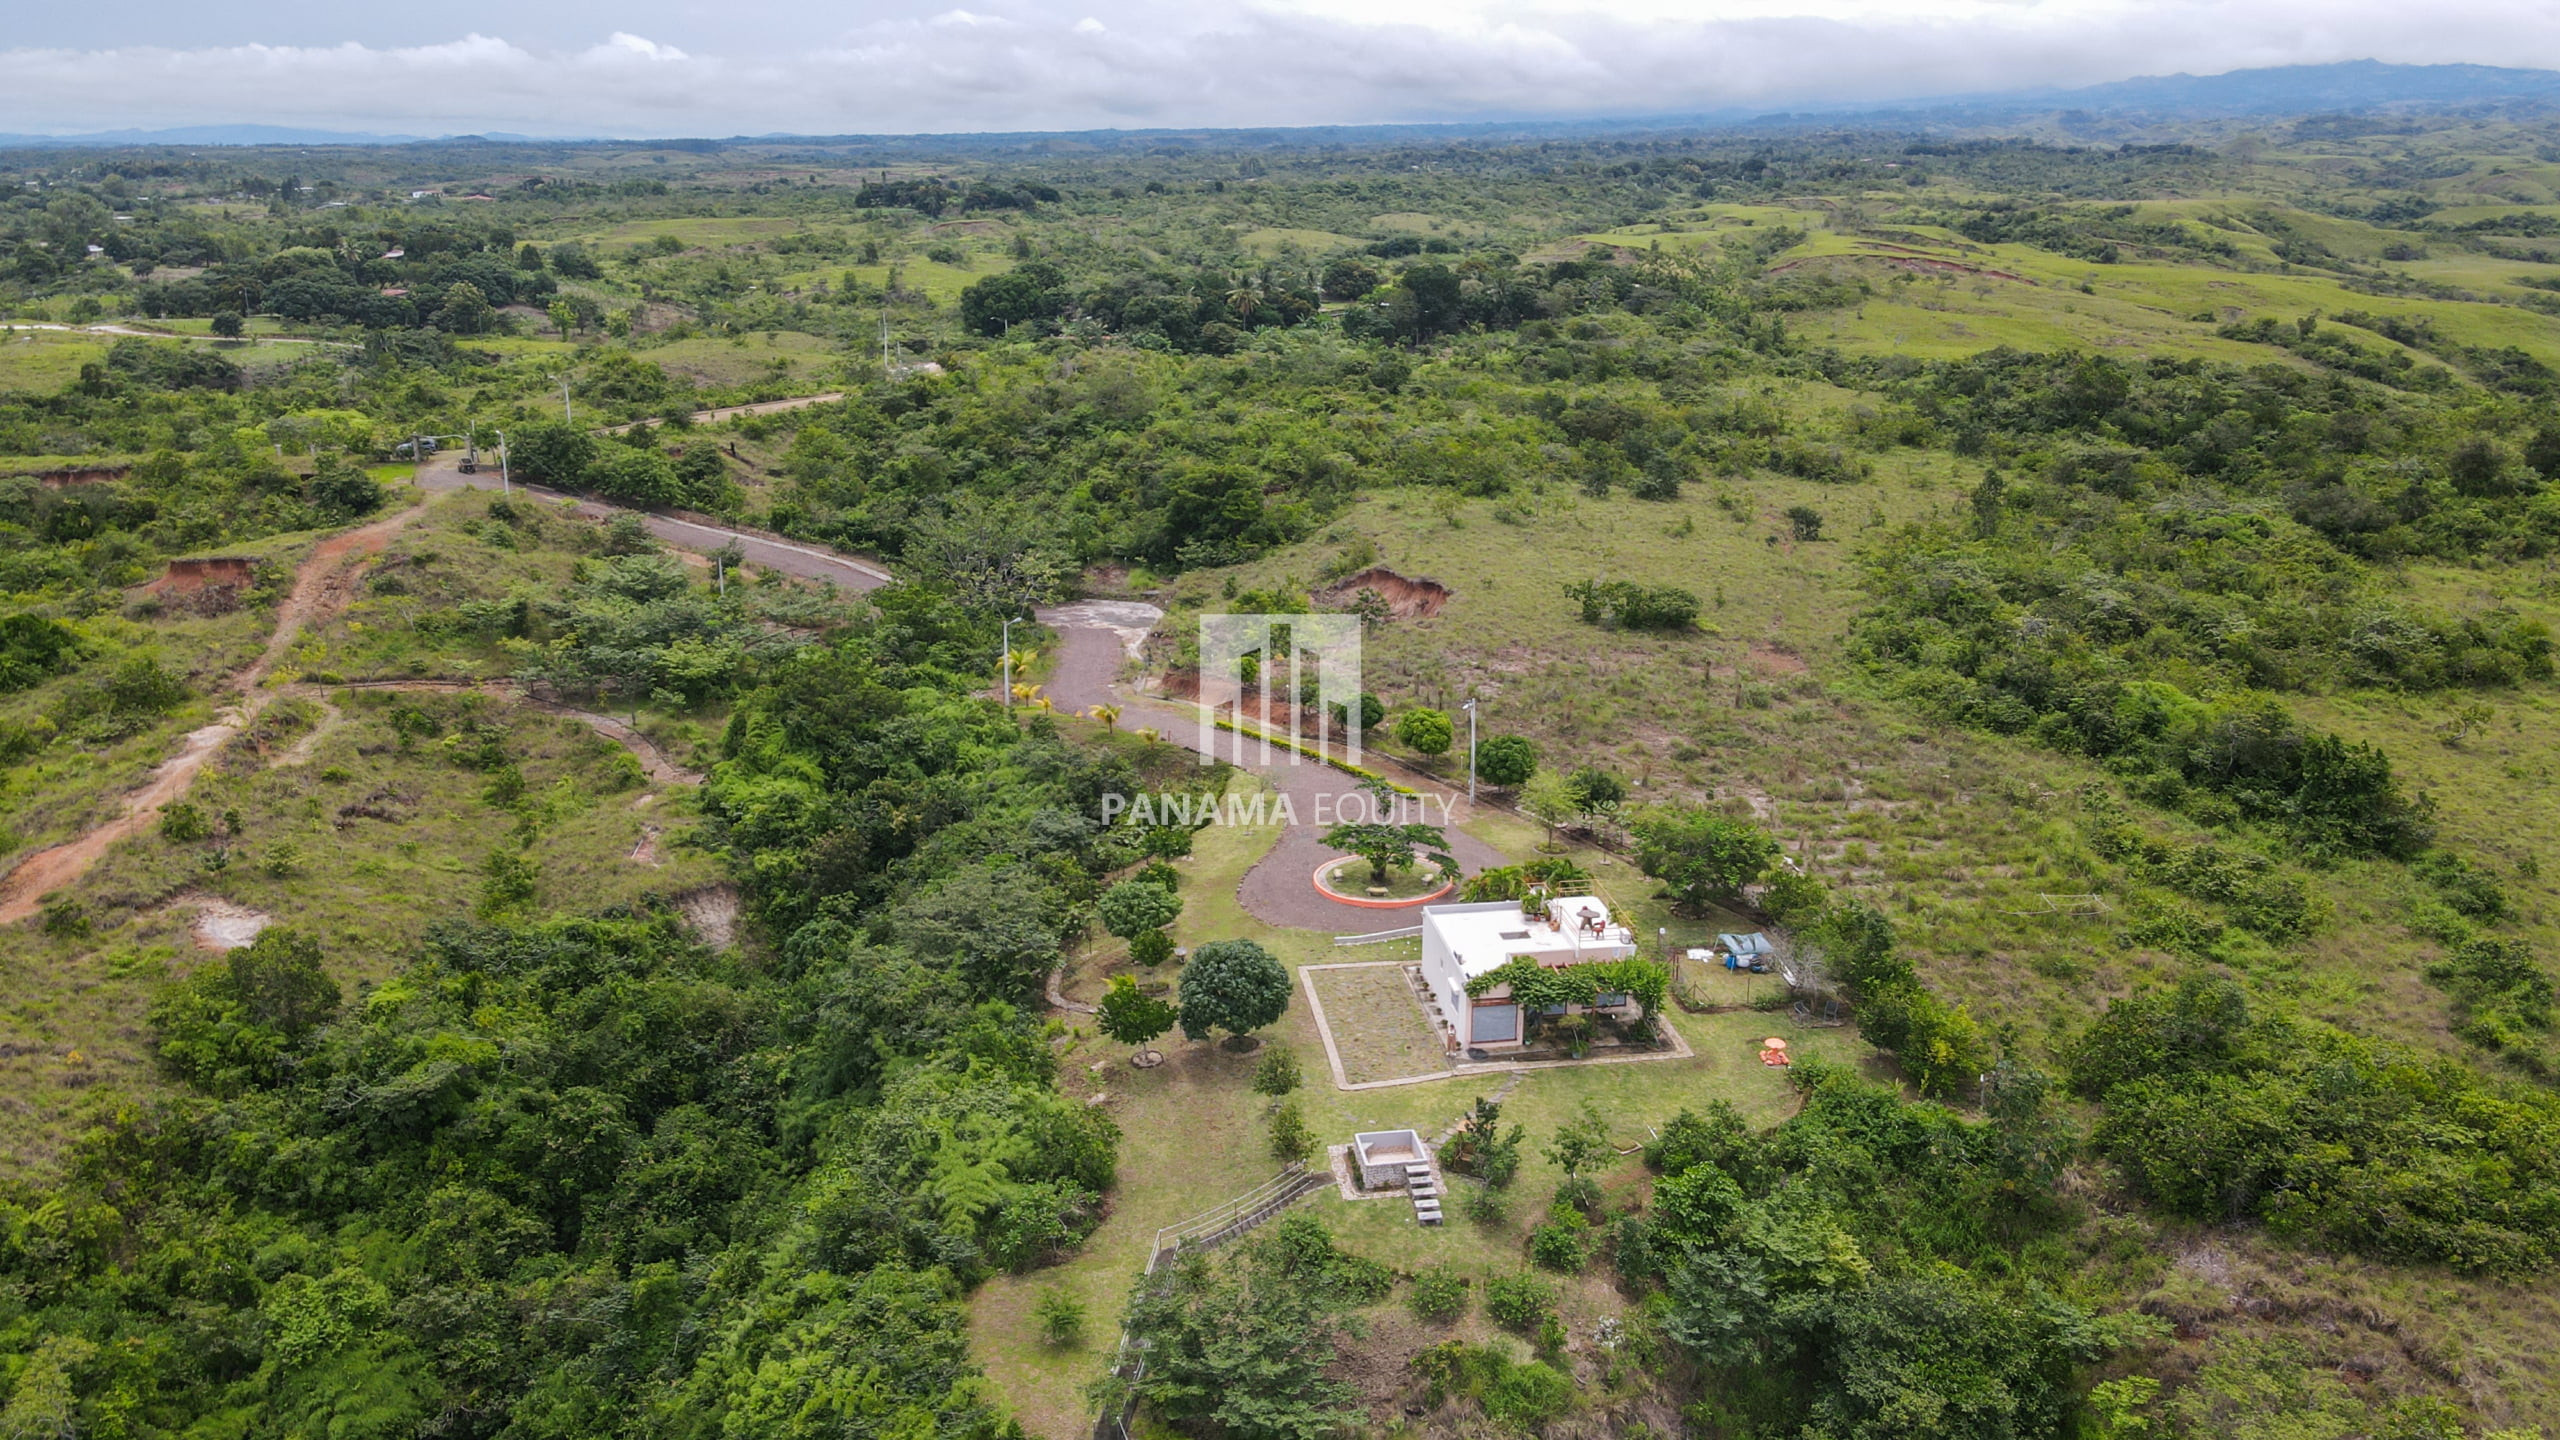 Riverfront Estate With Ocean Views And Income Generating Lemon Farm Option